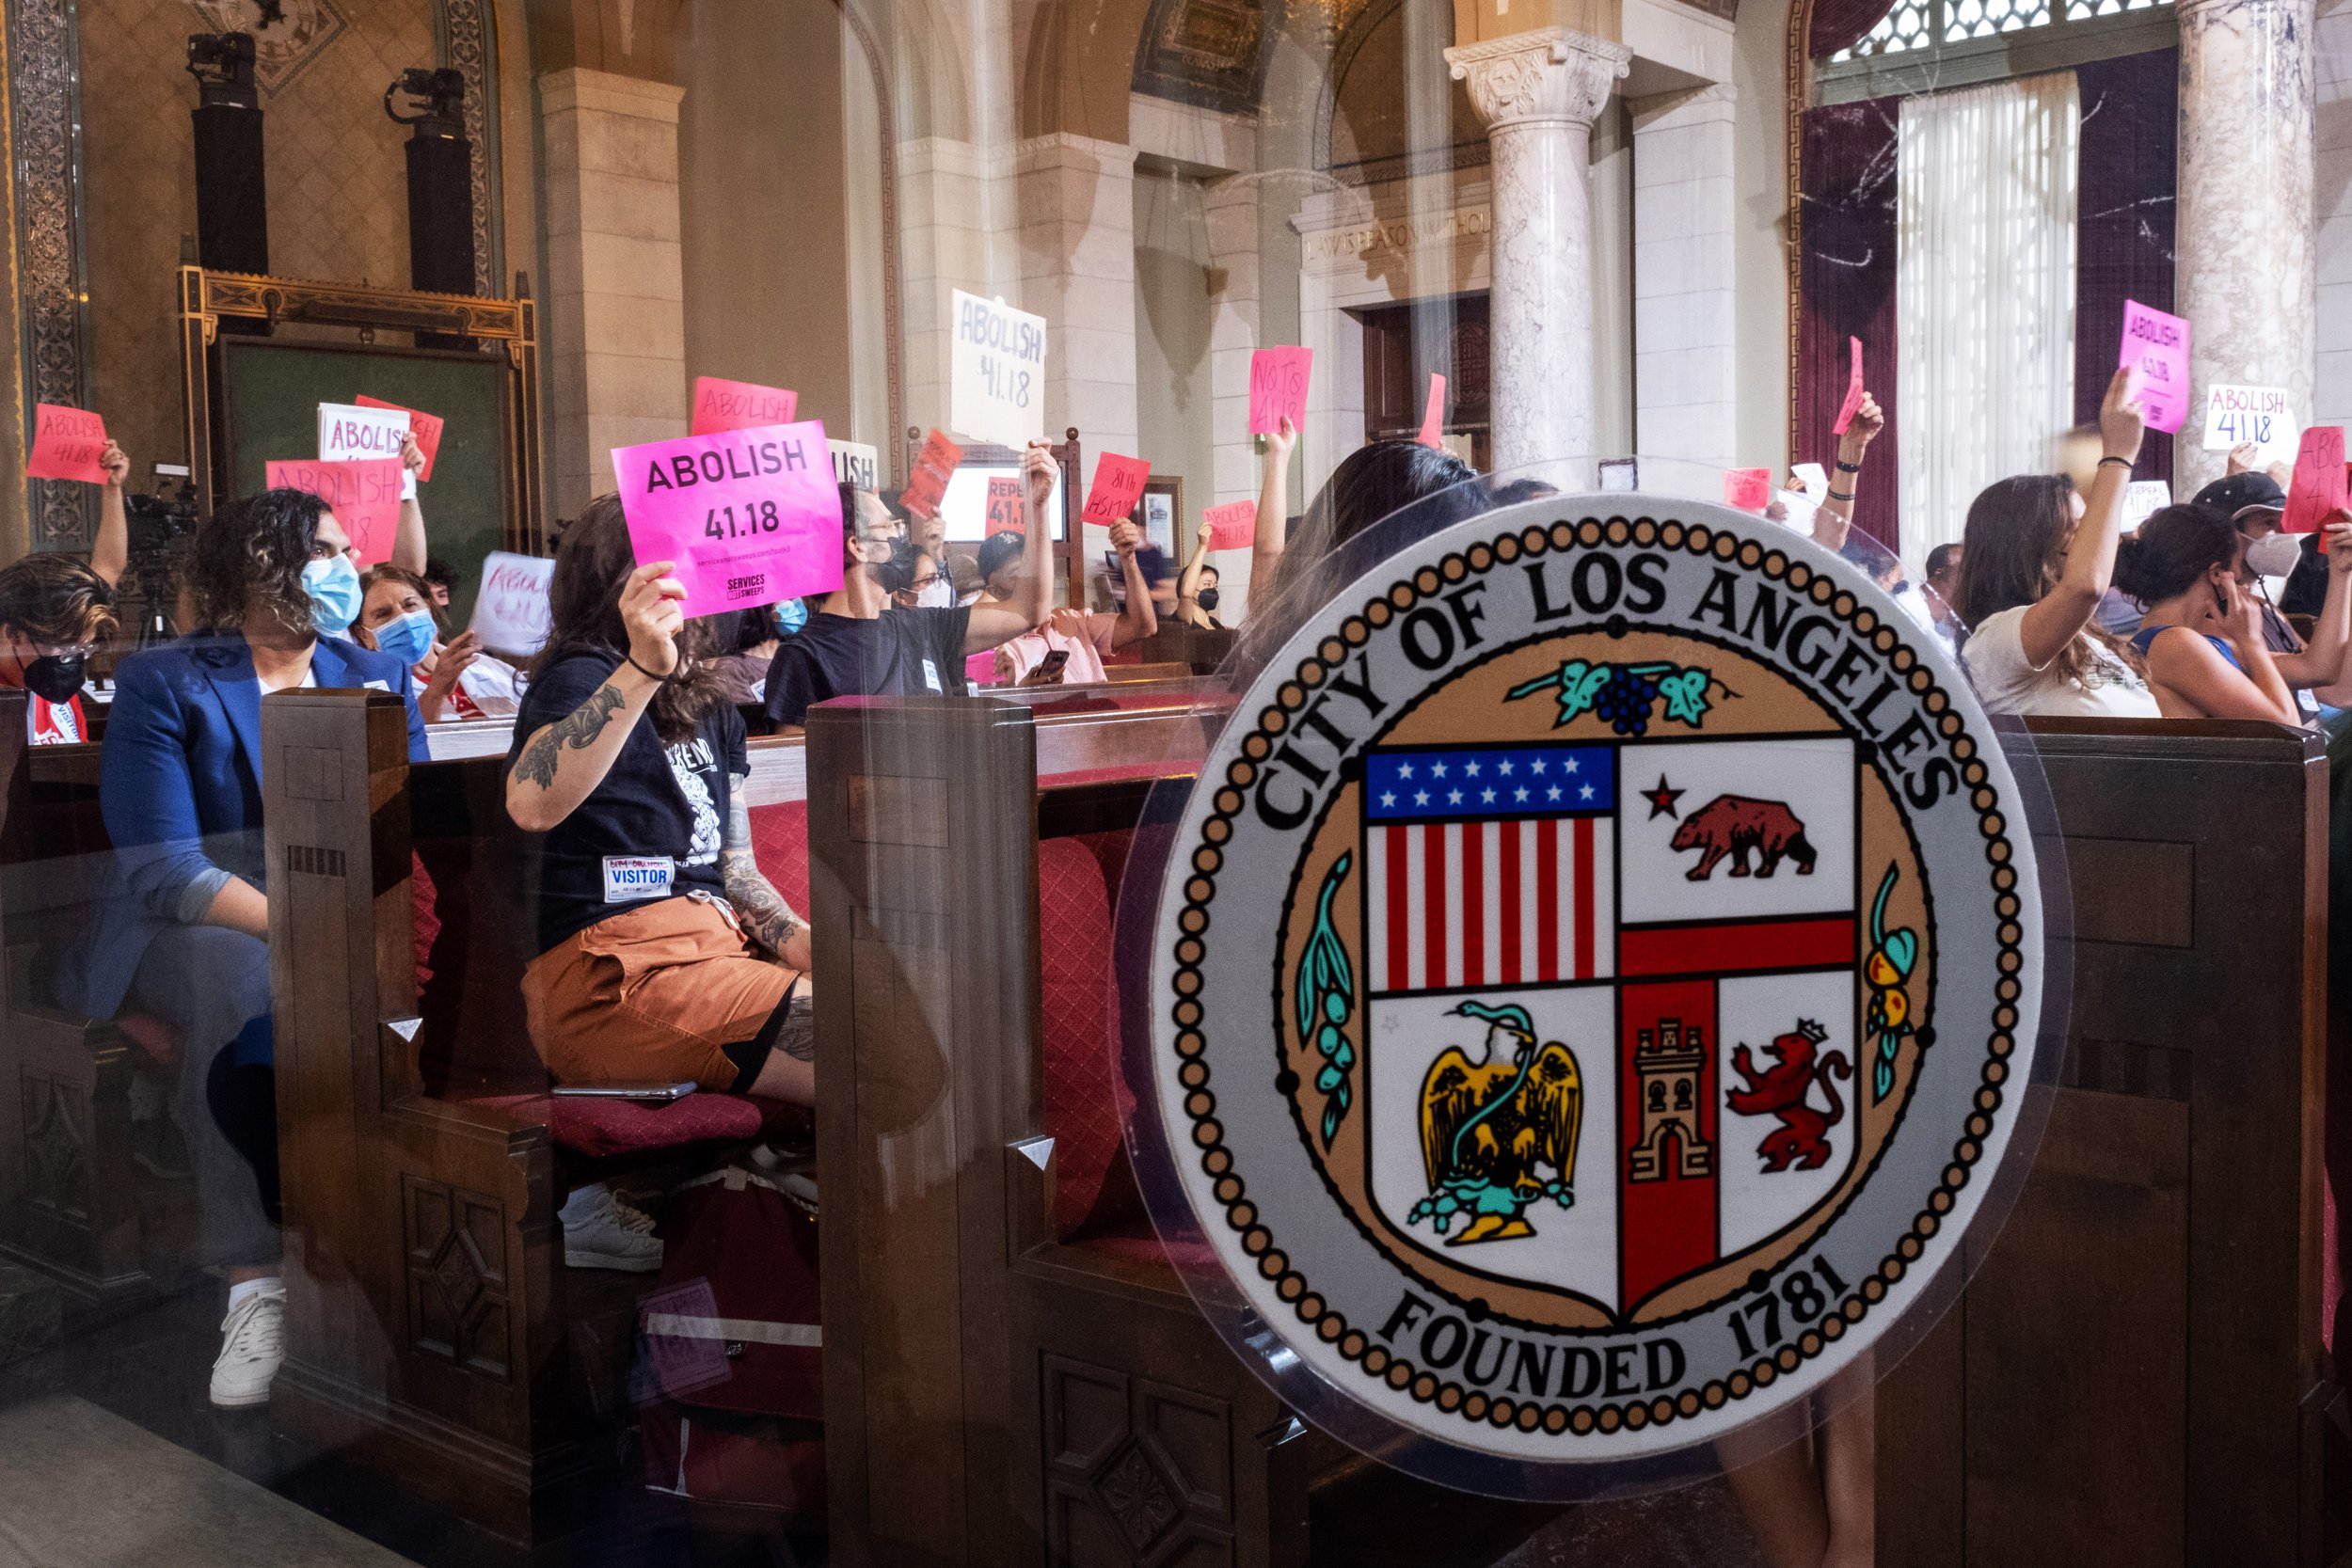  Los Angeles community members and activists gather inside of City Hall for a public hearing. The room is filled with signs and loud tones of dissent towards the new amendment to article 41.18, which would later be passed in an 11-3 vote by the Los A